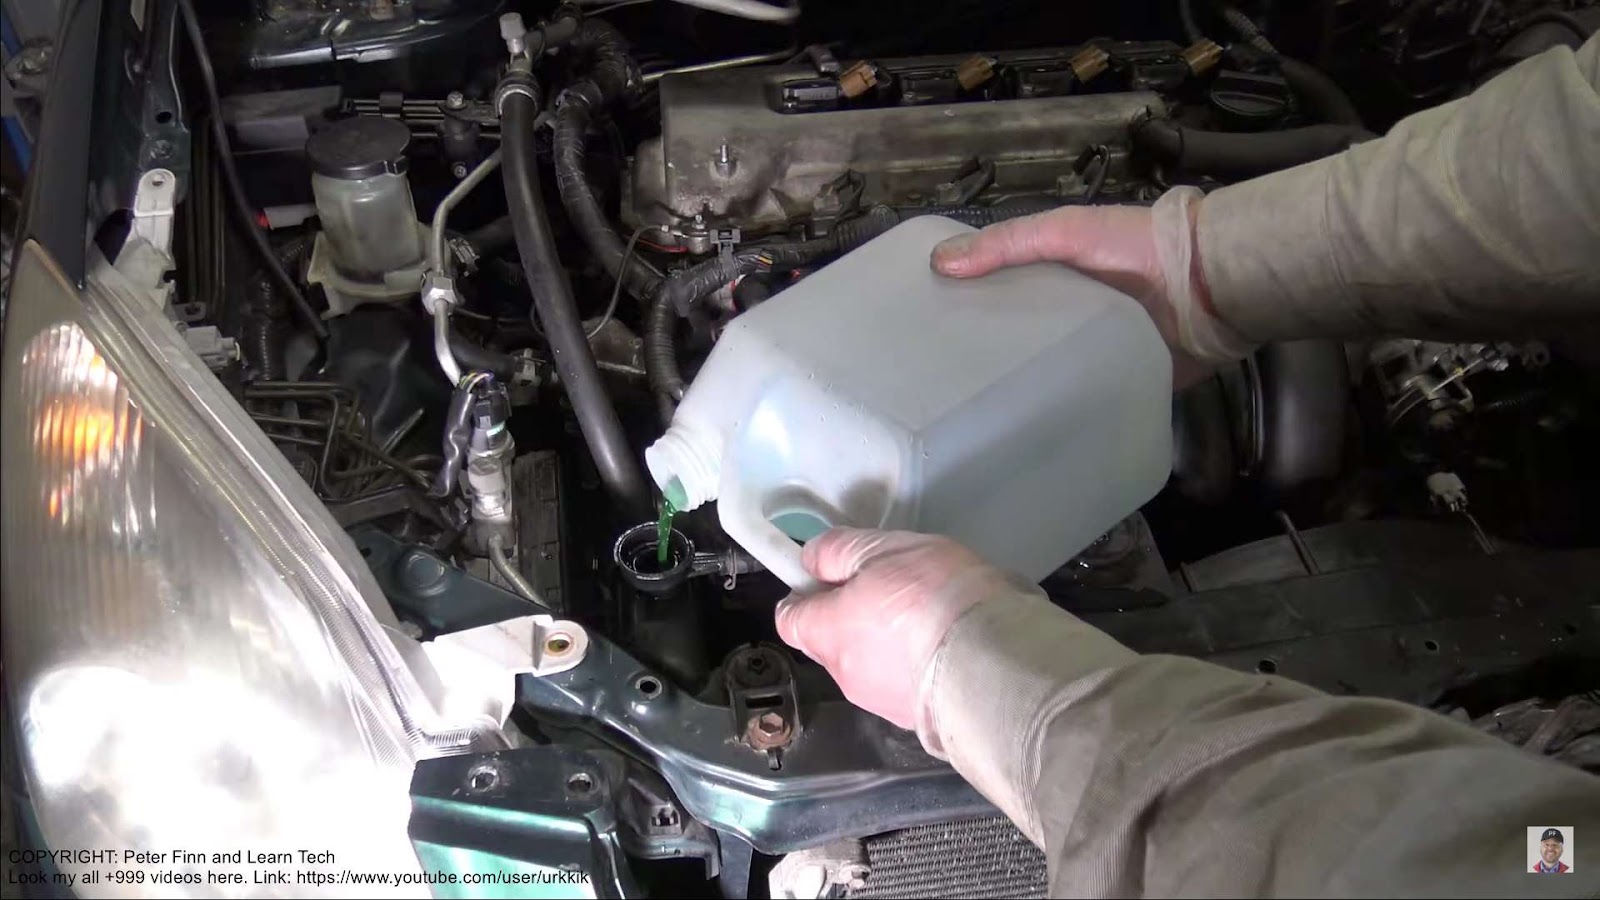 Process of putting coolant in car